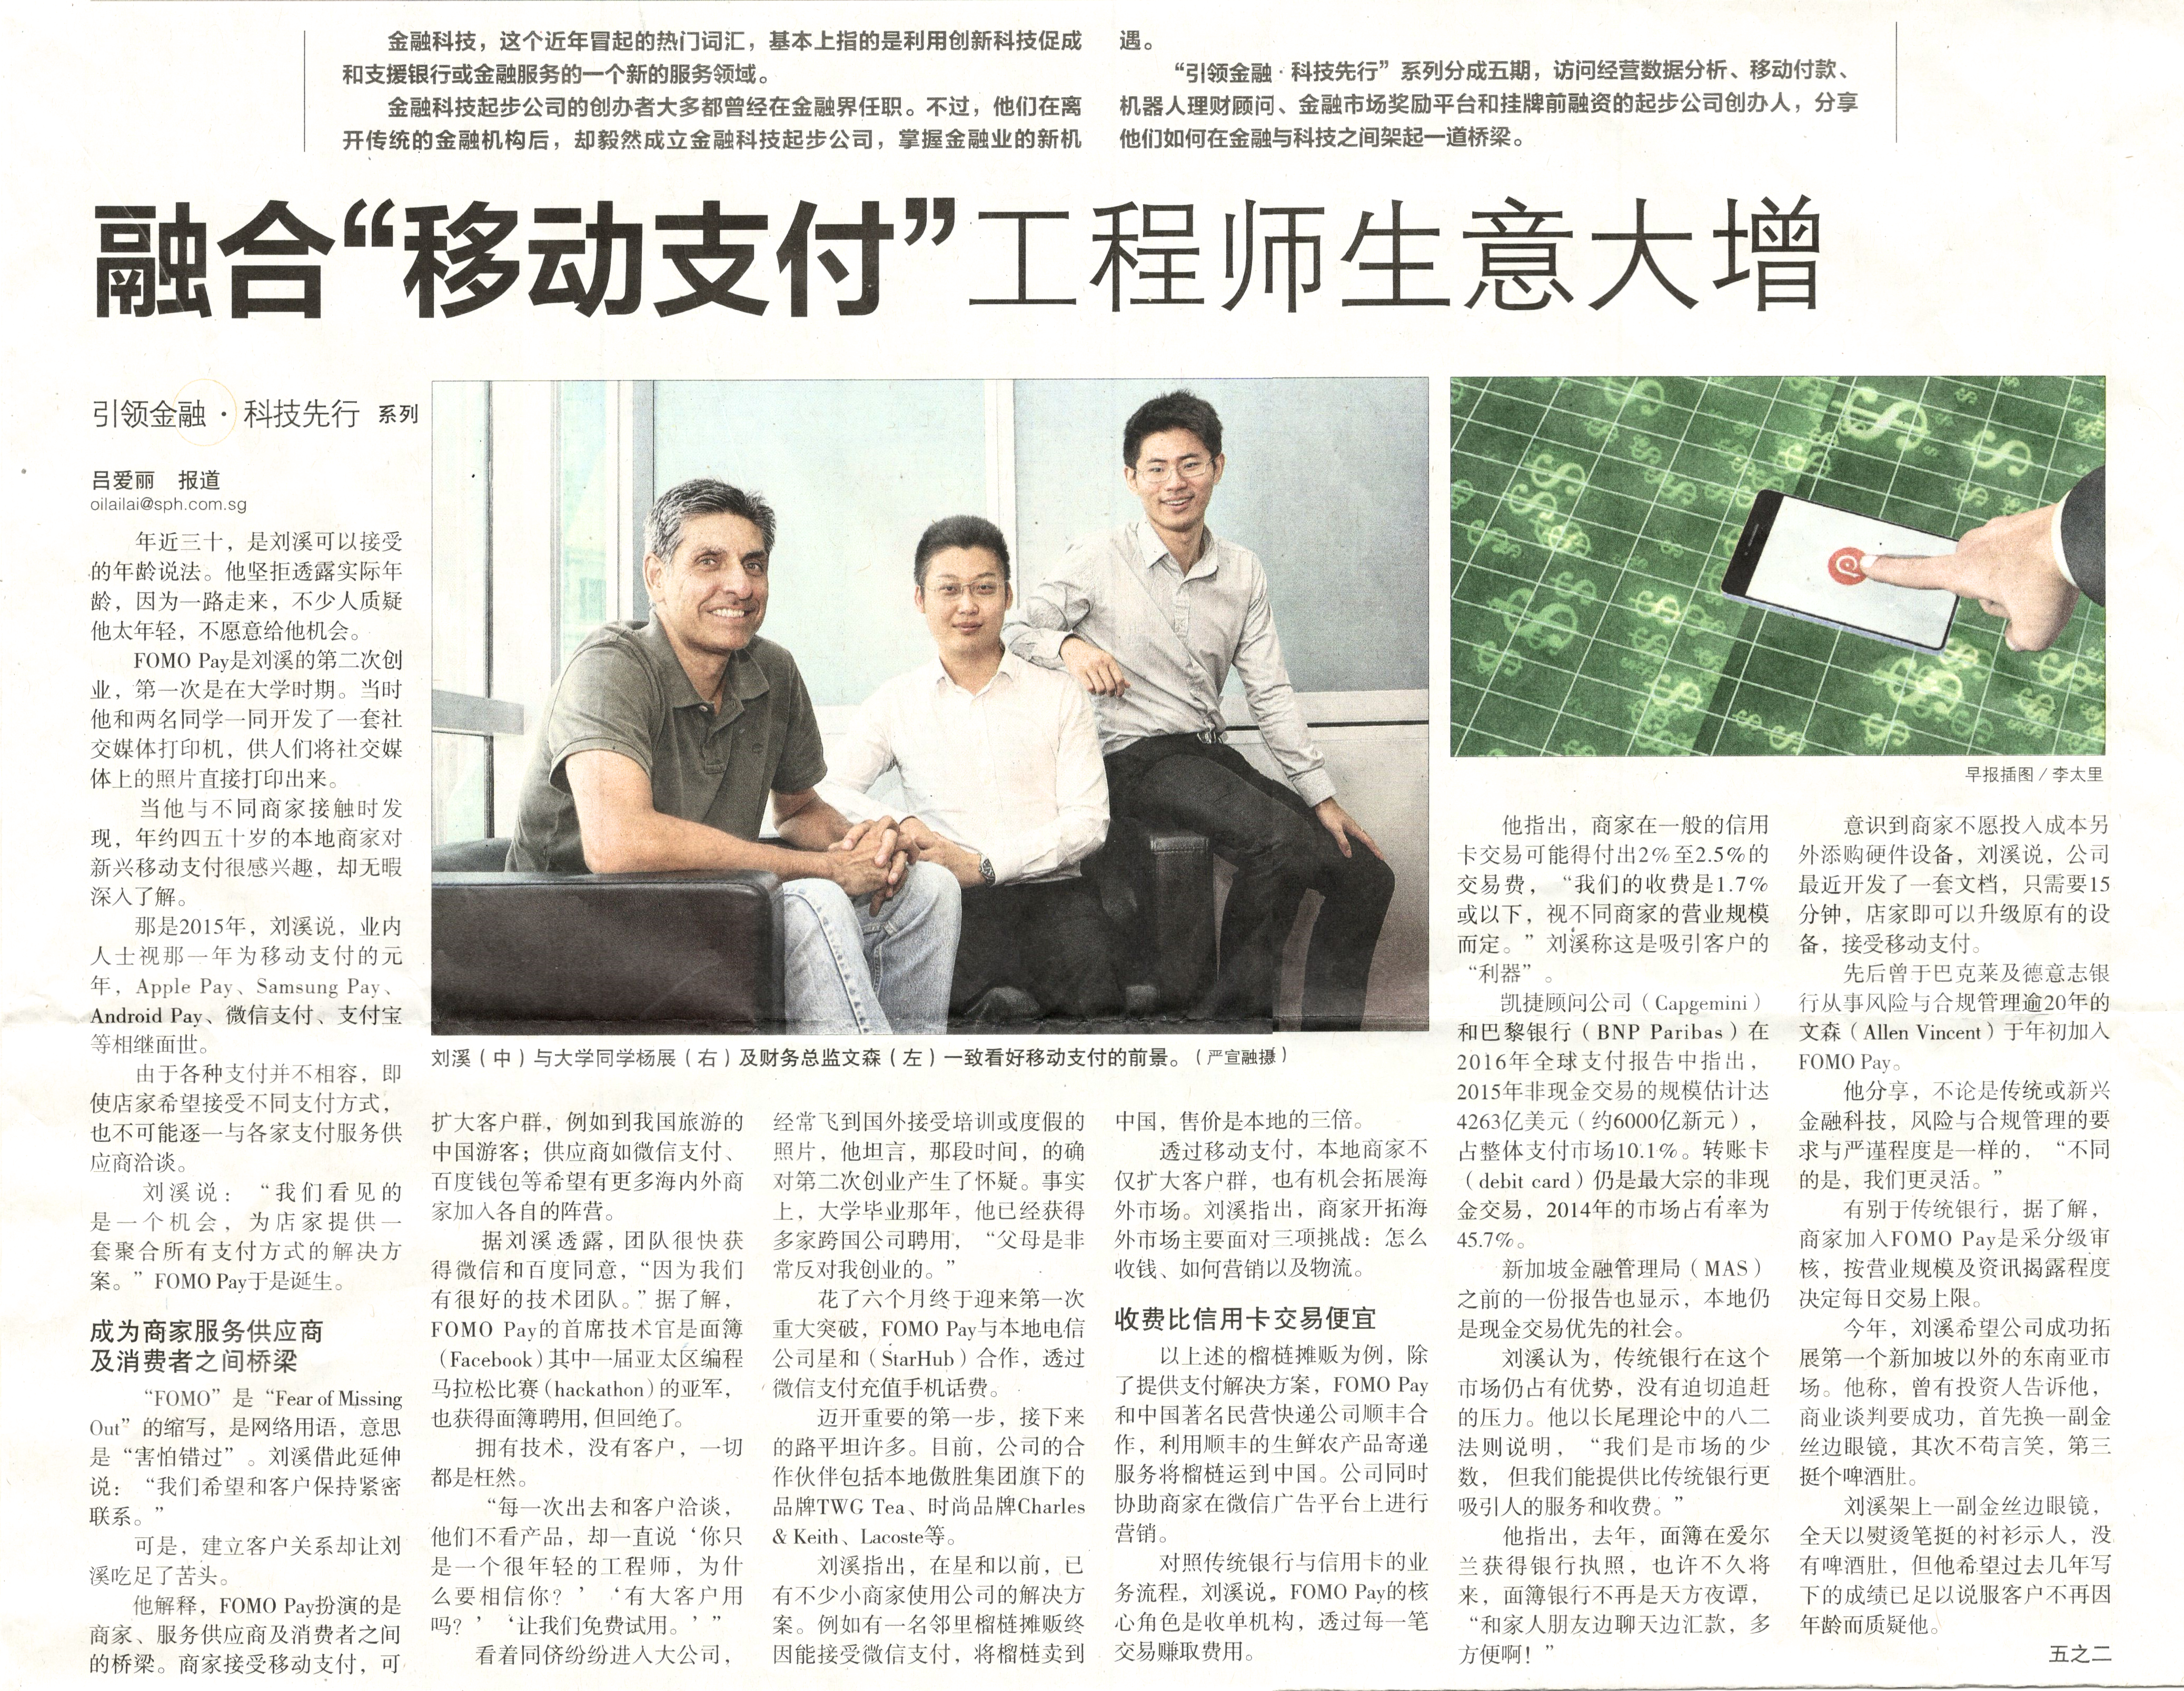 FOMO Pay, a mobile payment integrator in Singapore experiences business boom